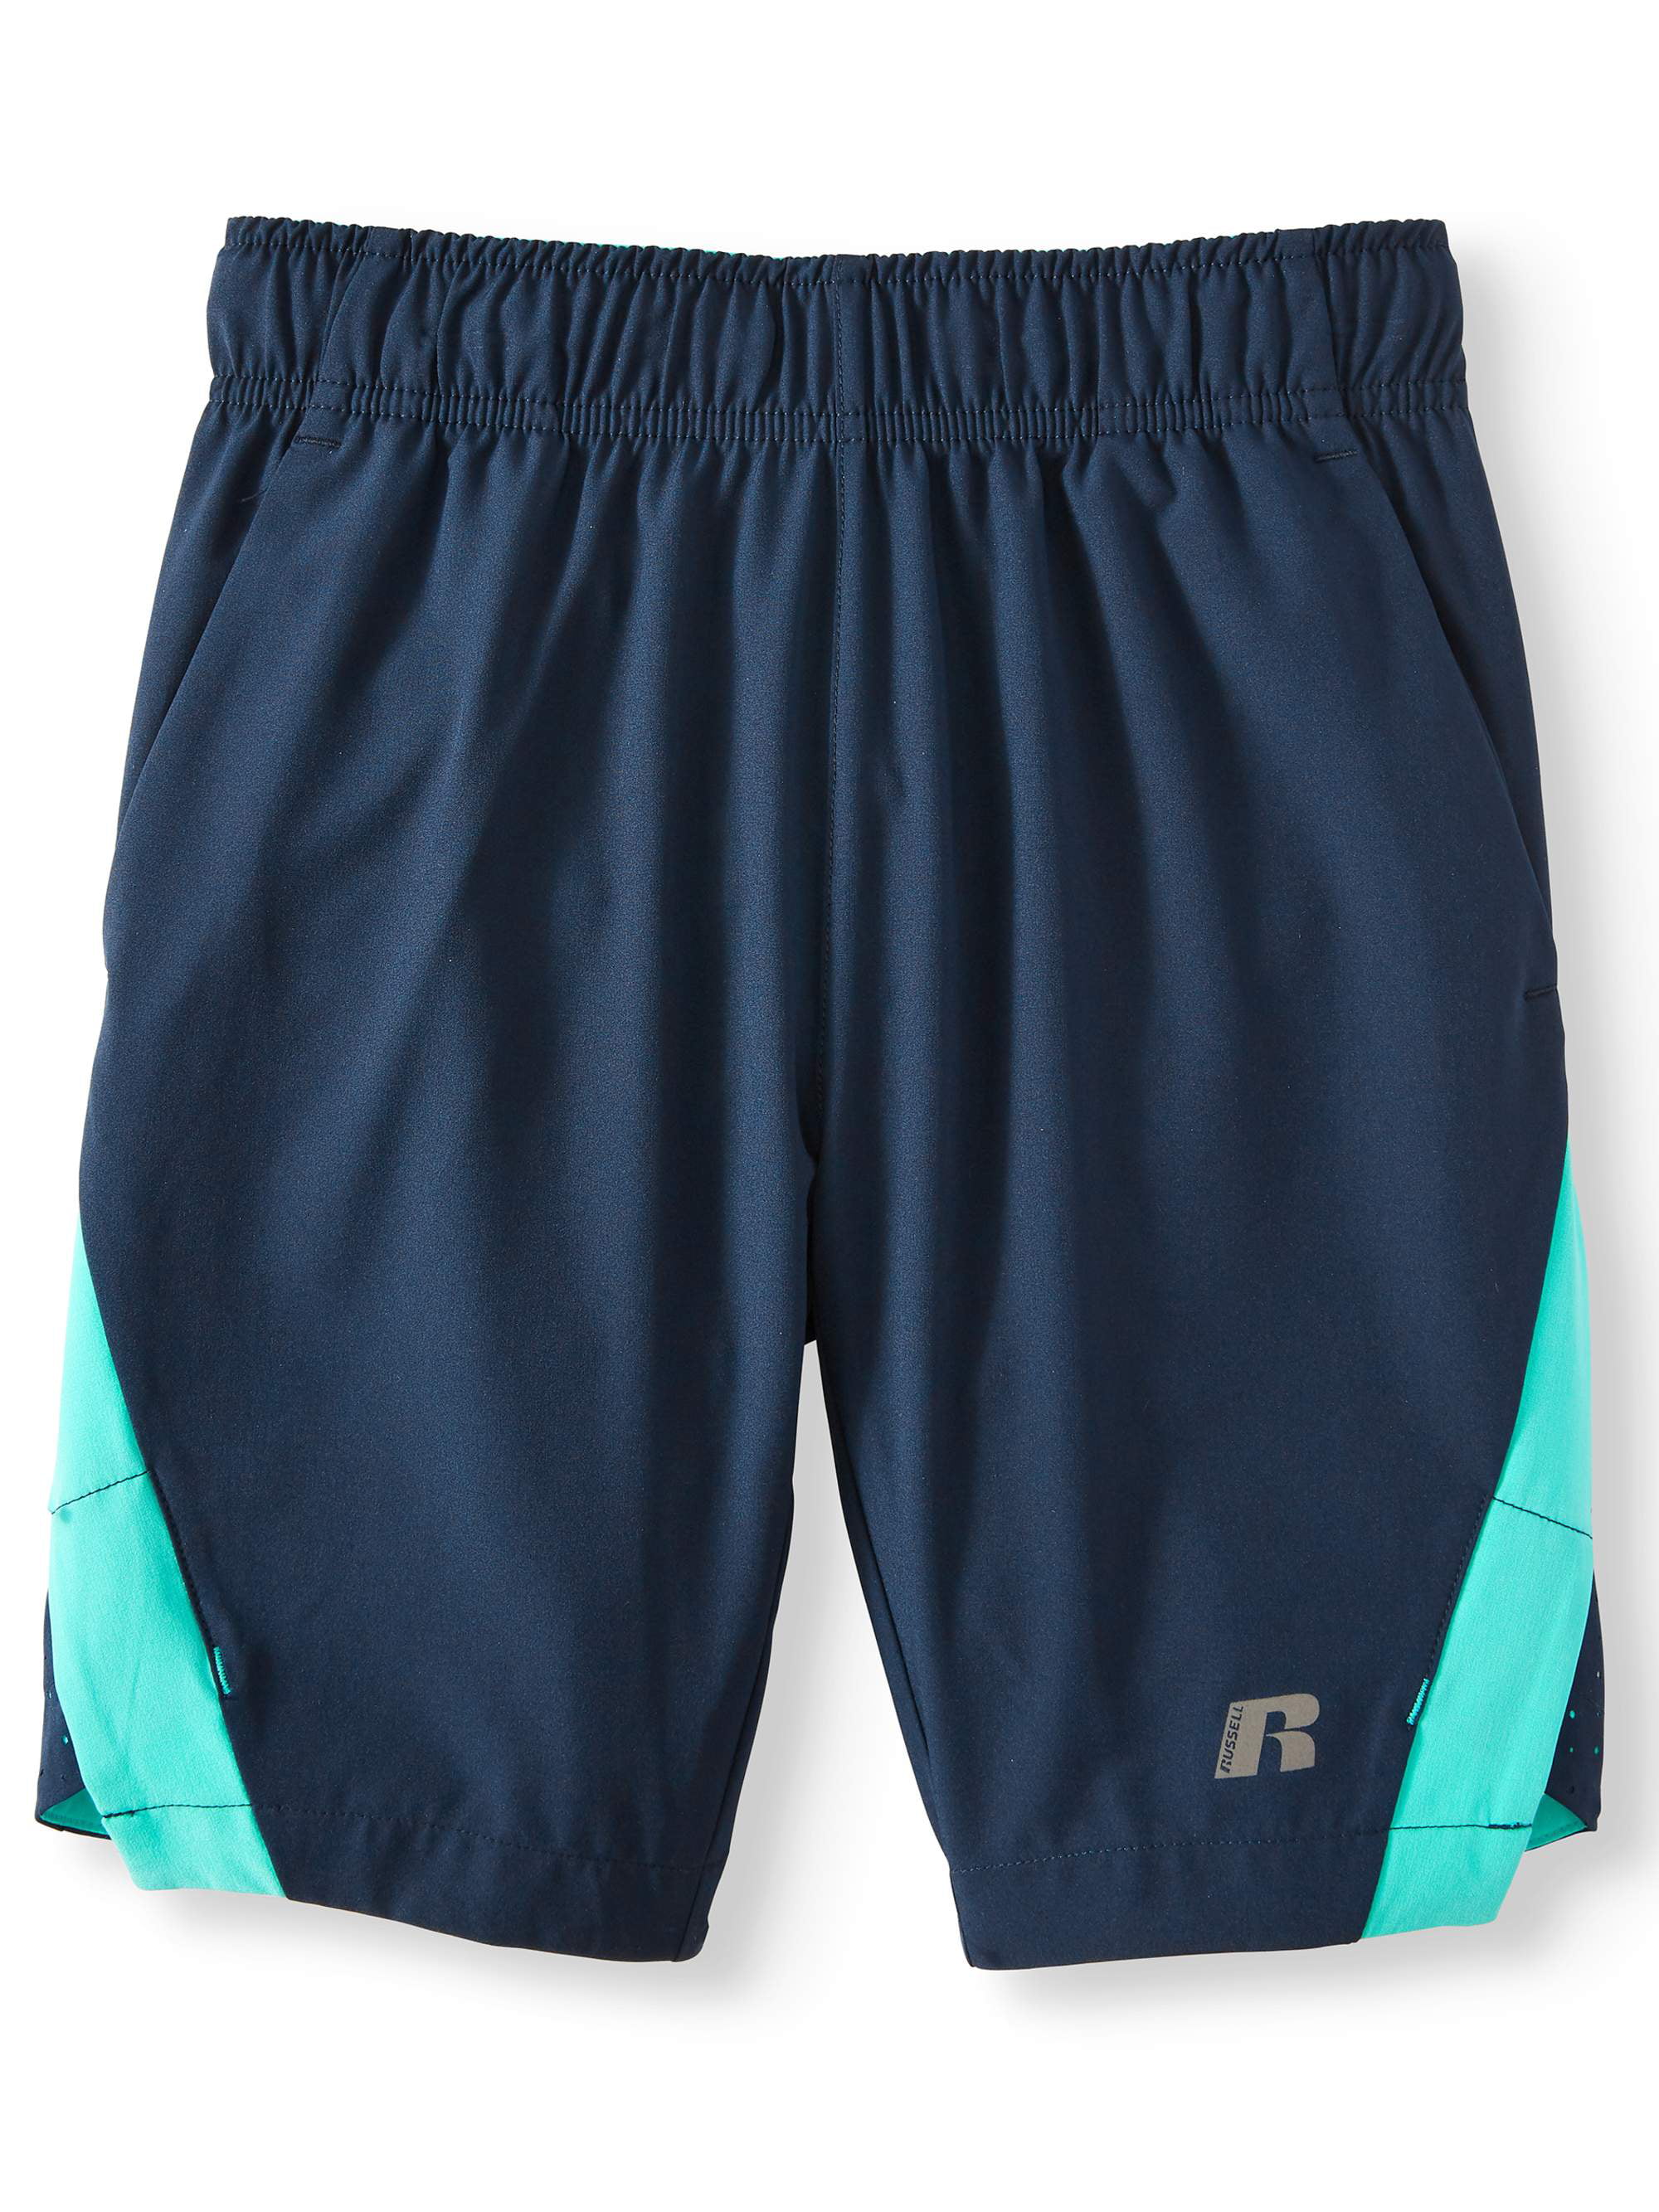 Russell - Russell Woven Stretch Performance Shorts (Little ...